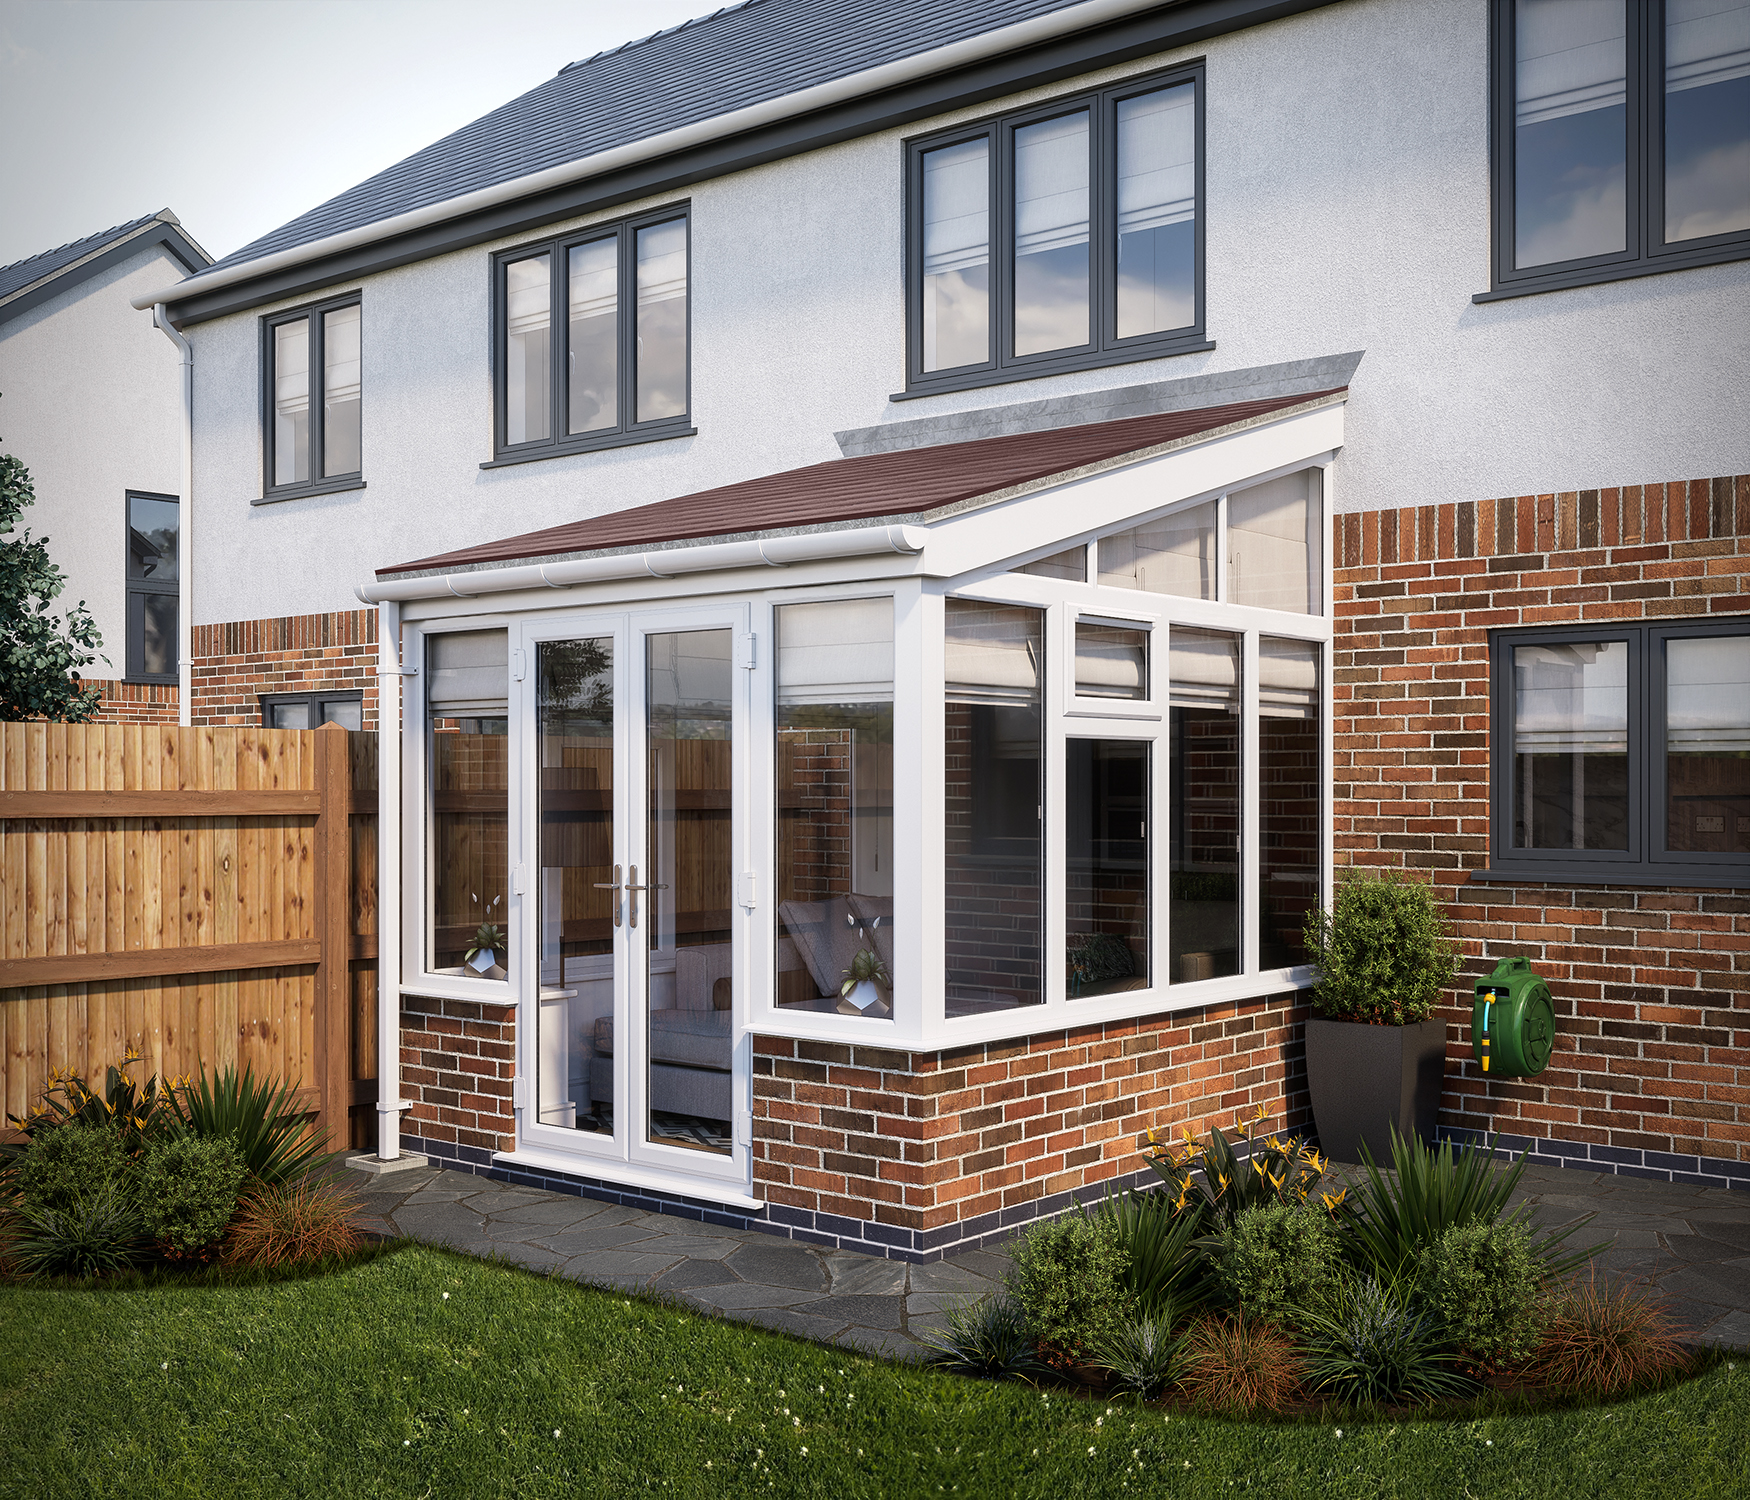 Image of SOLid Roof Lean to Conservatory White Frames Dwarf Wall with Rustic Brown Tiles - 10 x 10ft